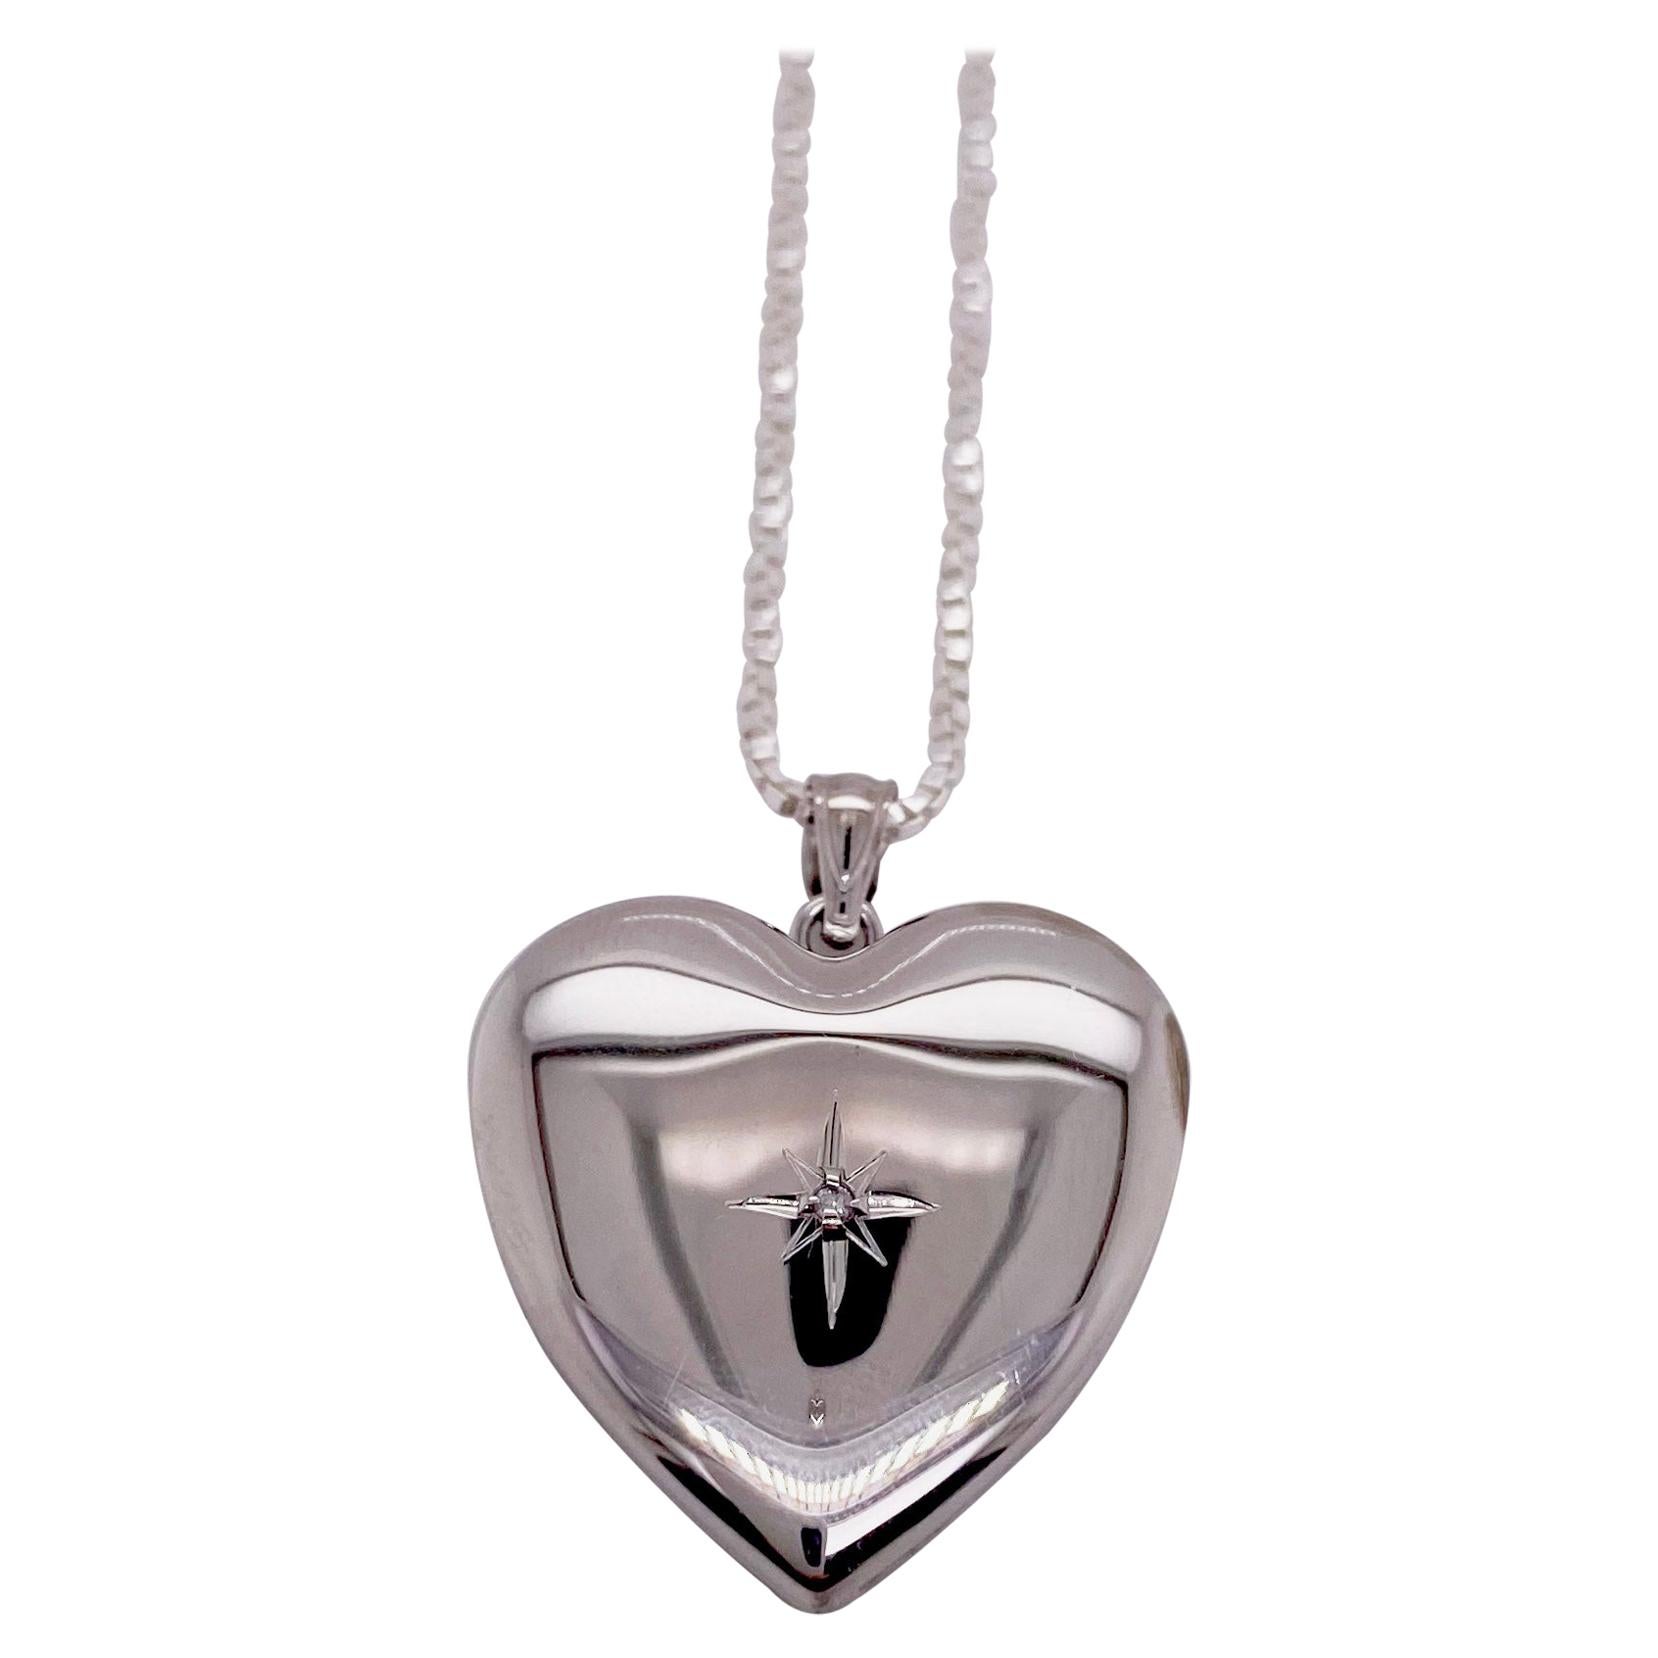 Diamond Heart Locket with Diamond Star in Sterling Silver Chain